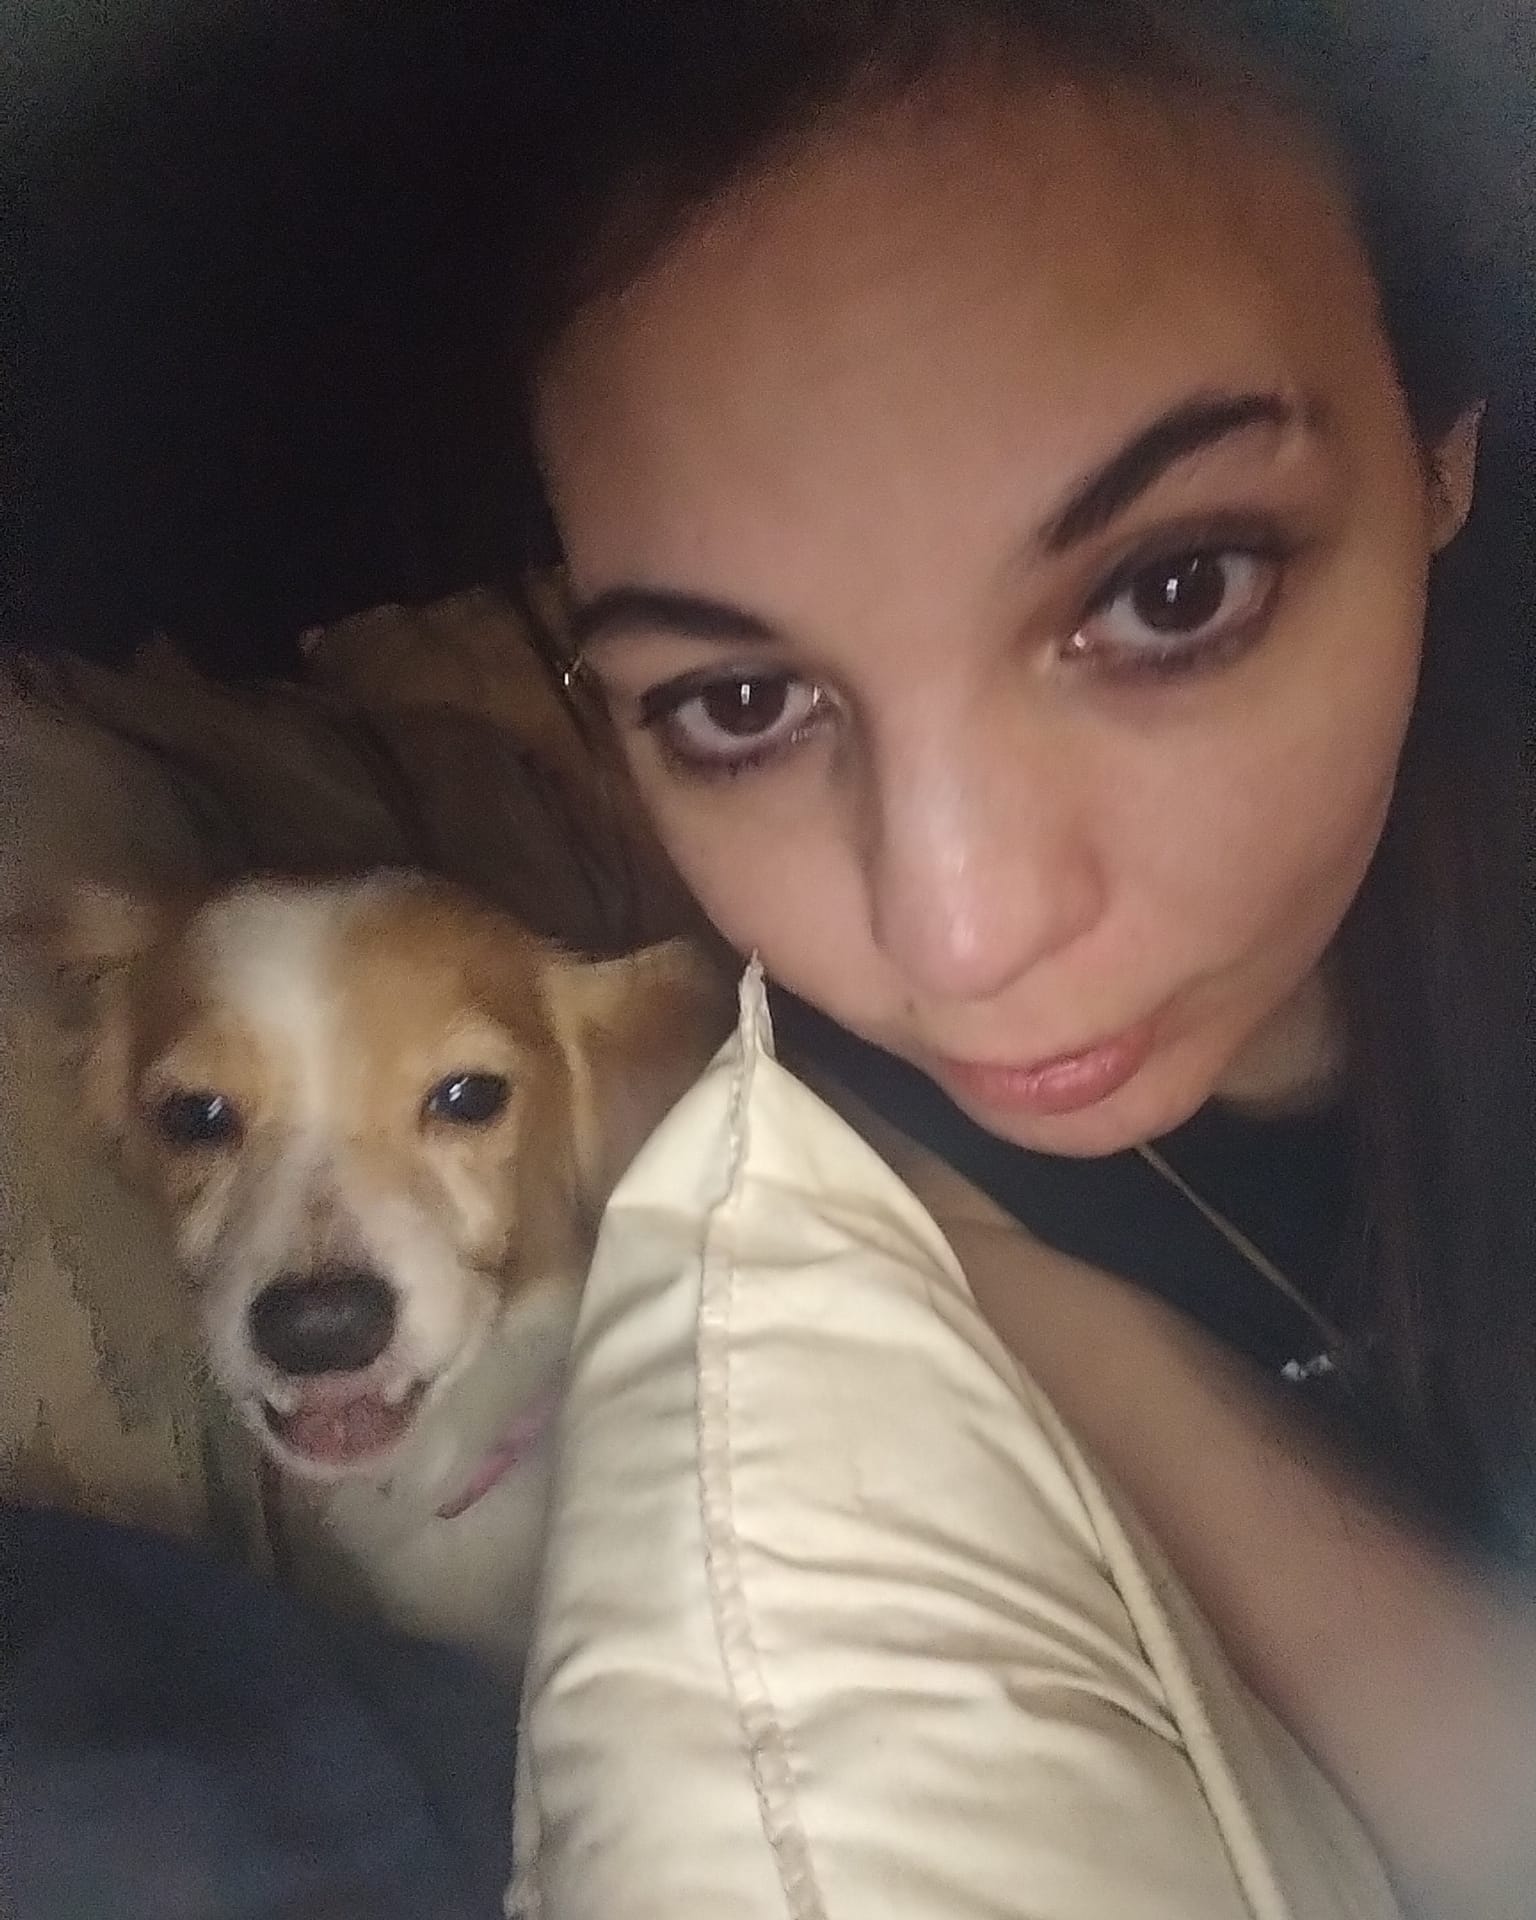 Please pray 🙏 for my dog.. Buttercup.. she's been going through some hard times..taking after her mother (my soulmate GLACIE) .. she had a seizure/stroke and has been 'off' since..it breaks my heart.. but she is a fighter so tough for 10pounds .. my BAE! SEND POSITIVE VIBES THIS WAY PLEASE 💜 my lil Aries twin. And Glacie babyyy!! I love you endlessly.